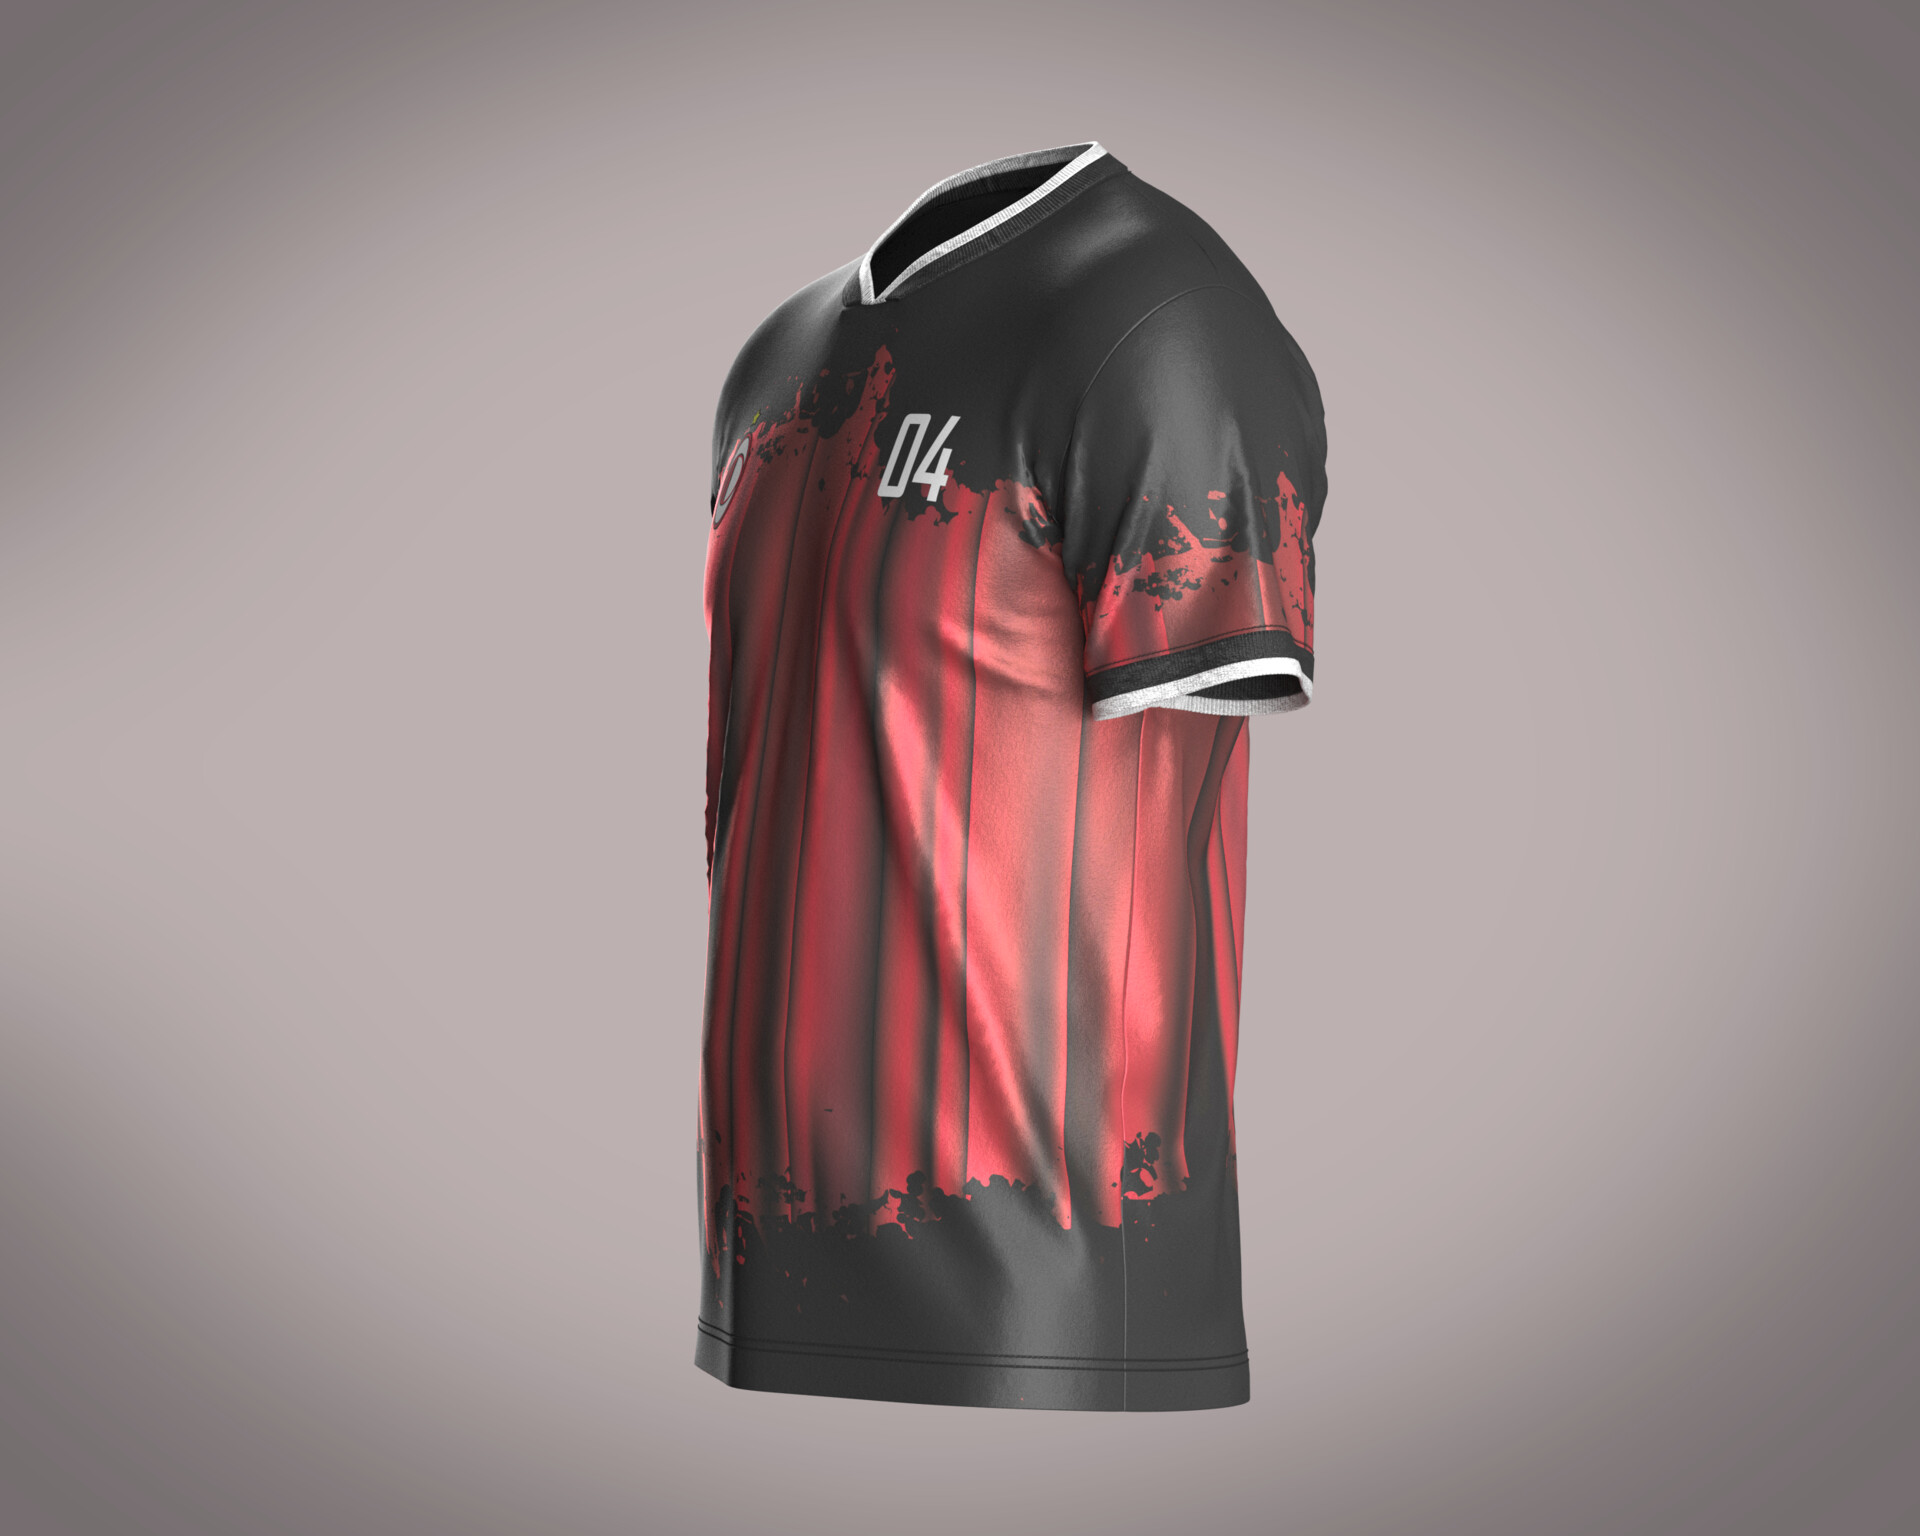 ArtStation - Soccer Black and Red Jersey Player-04